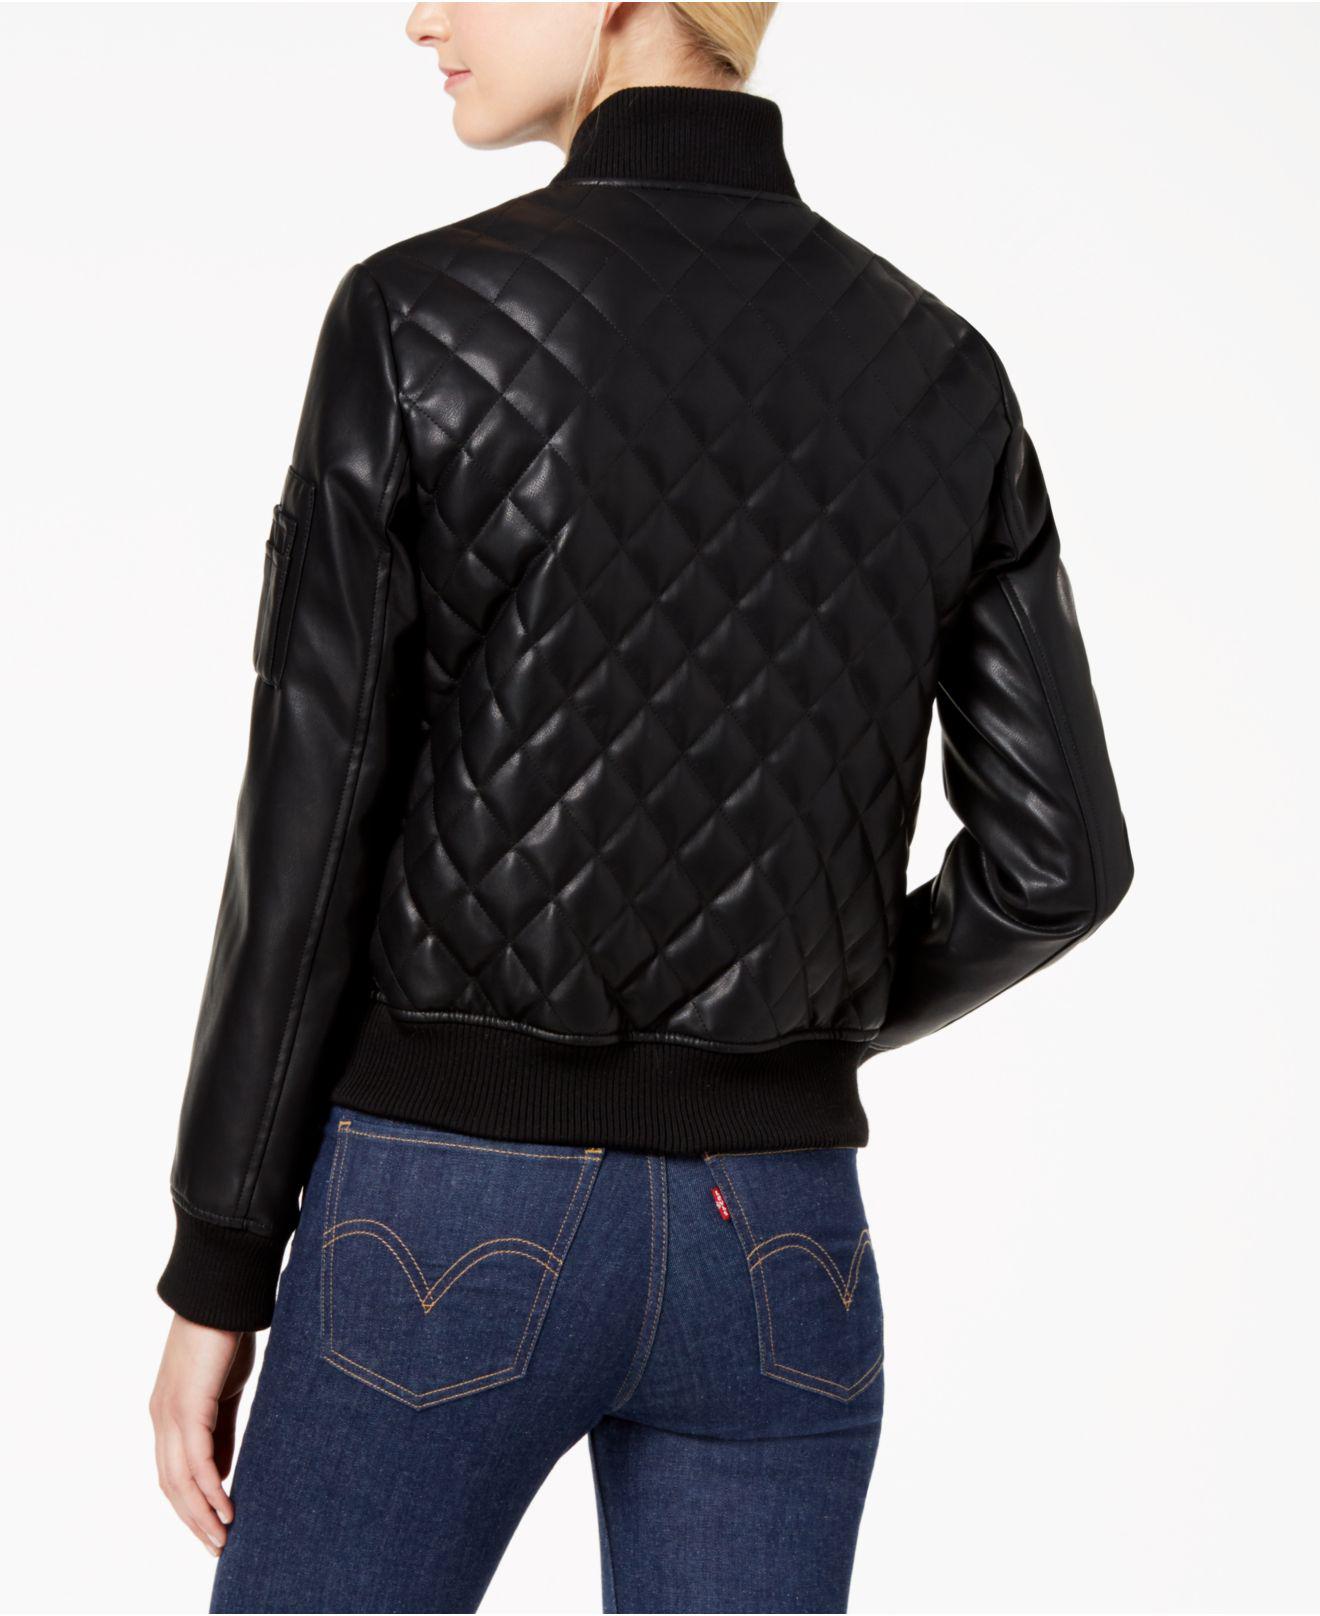 French Connection Diamond-quilted Faux-leather Bomber Jacket in Black - Lyst